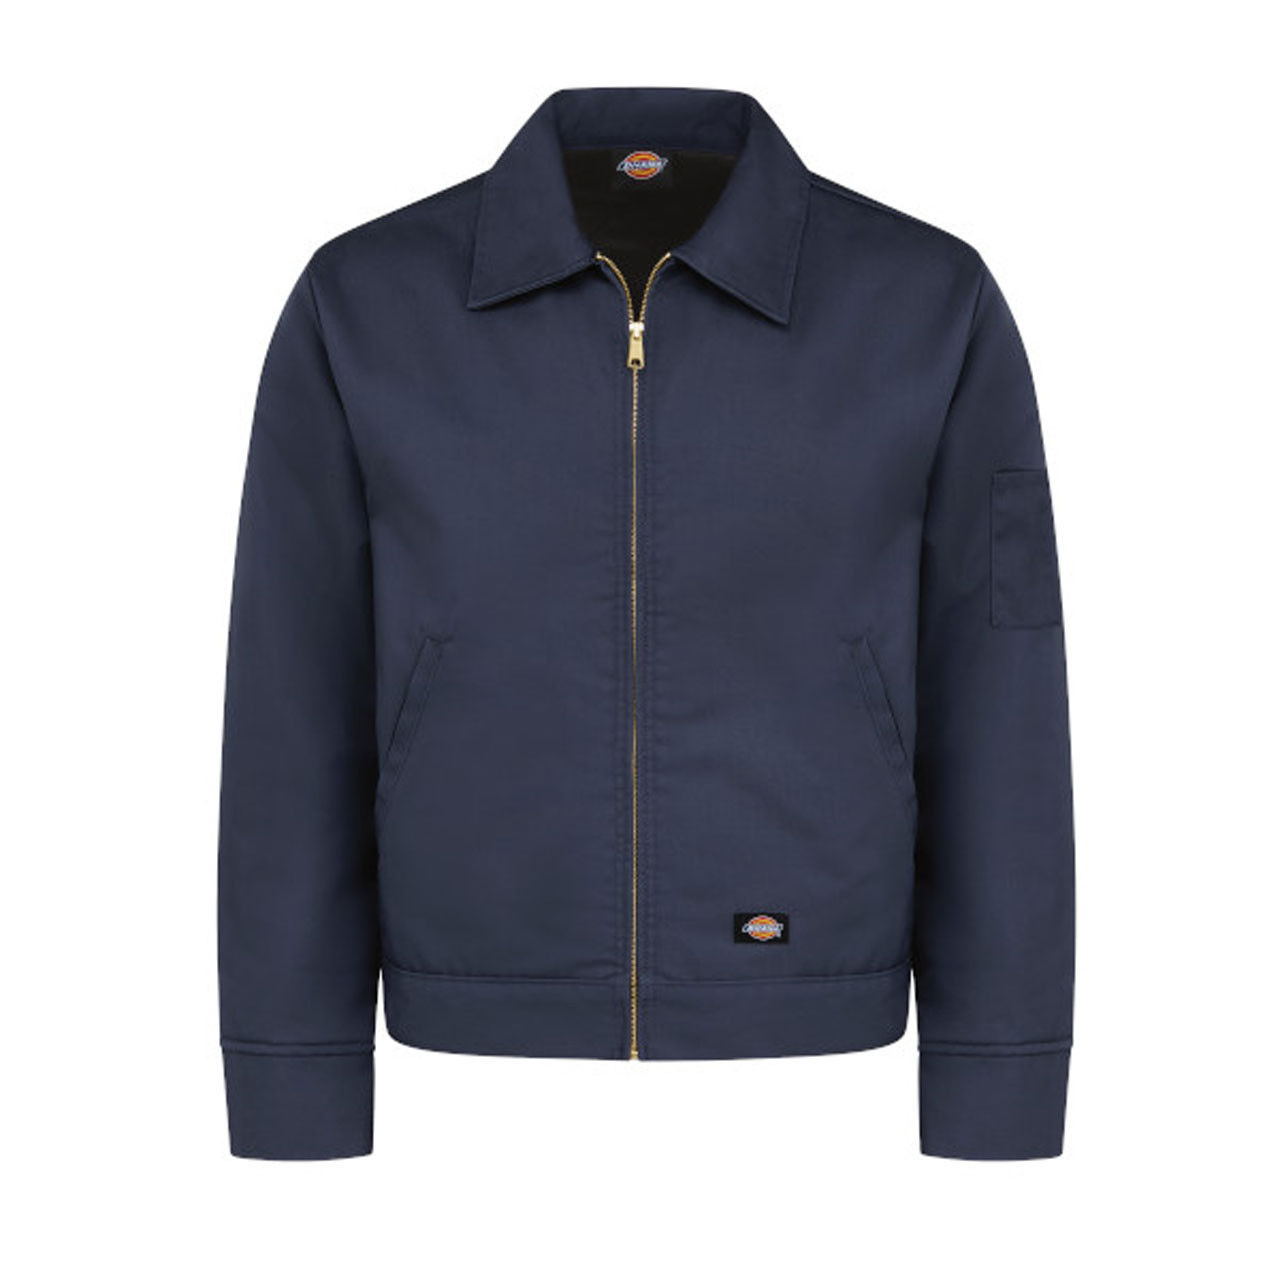 How heavy is the navy Eisenhower jacket?